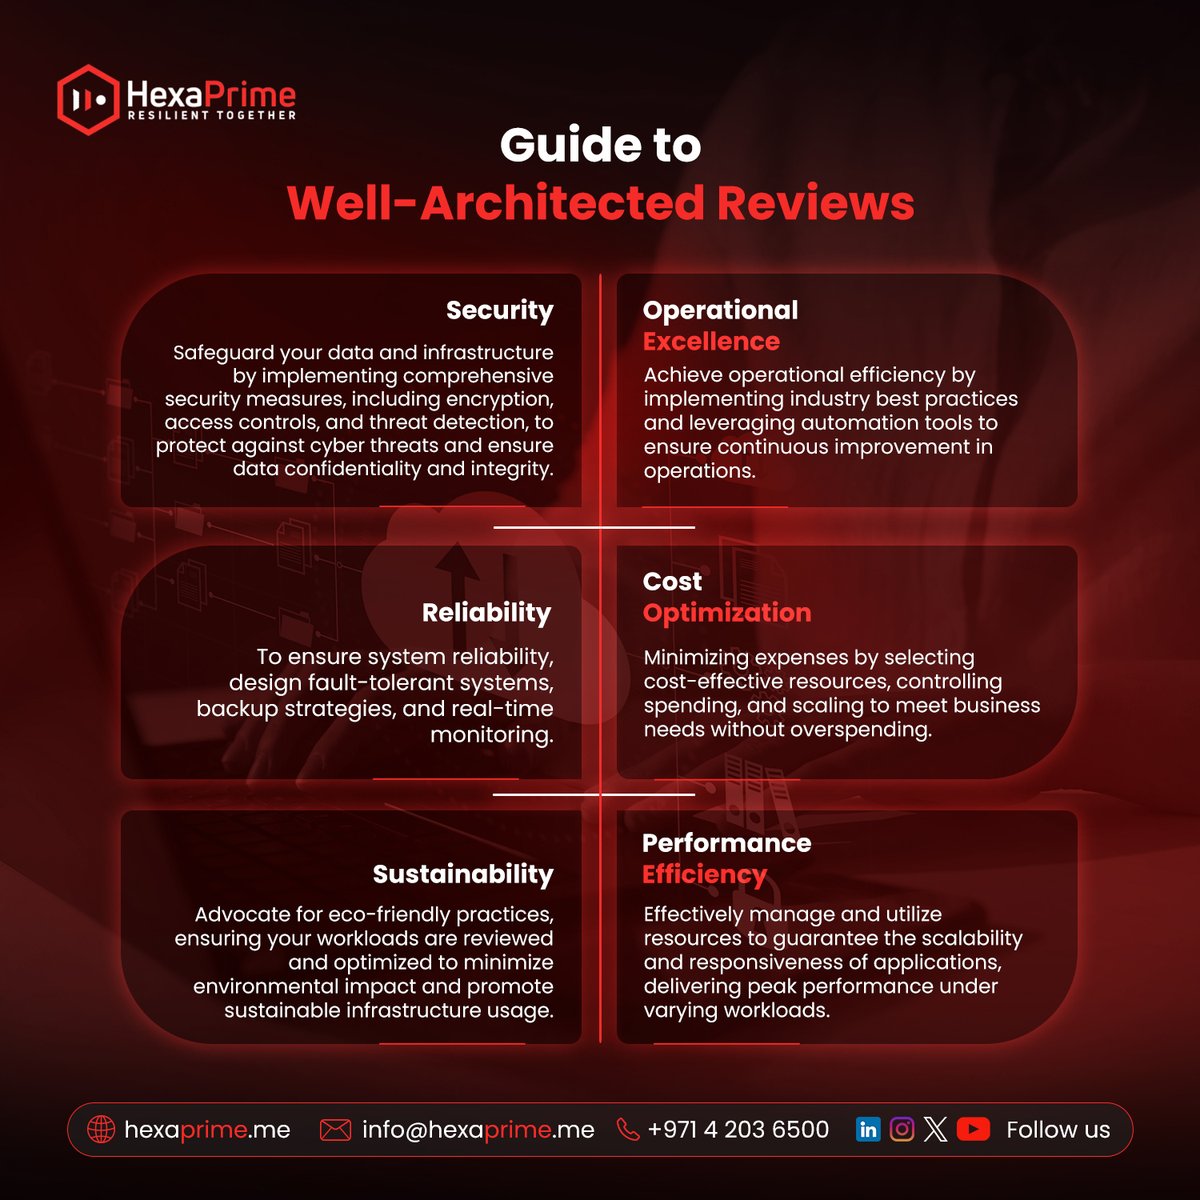 Elevate your architecture with our Well-Architected Reviews. ​
Contact us today at info@hexaprime.me​

​#HexaPrime #ElevateWithCloud ​ #CloudArchitecture #CloudExcellence